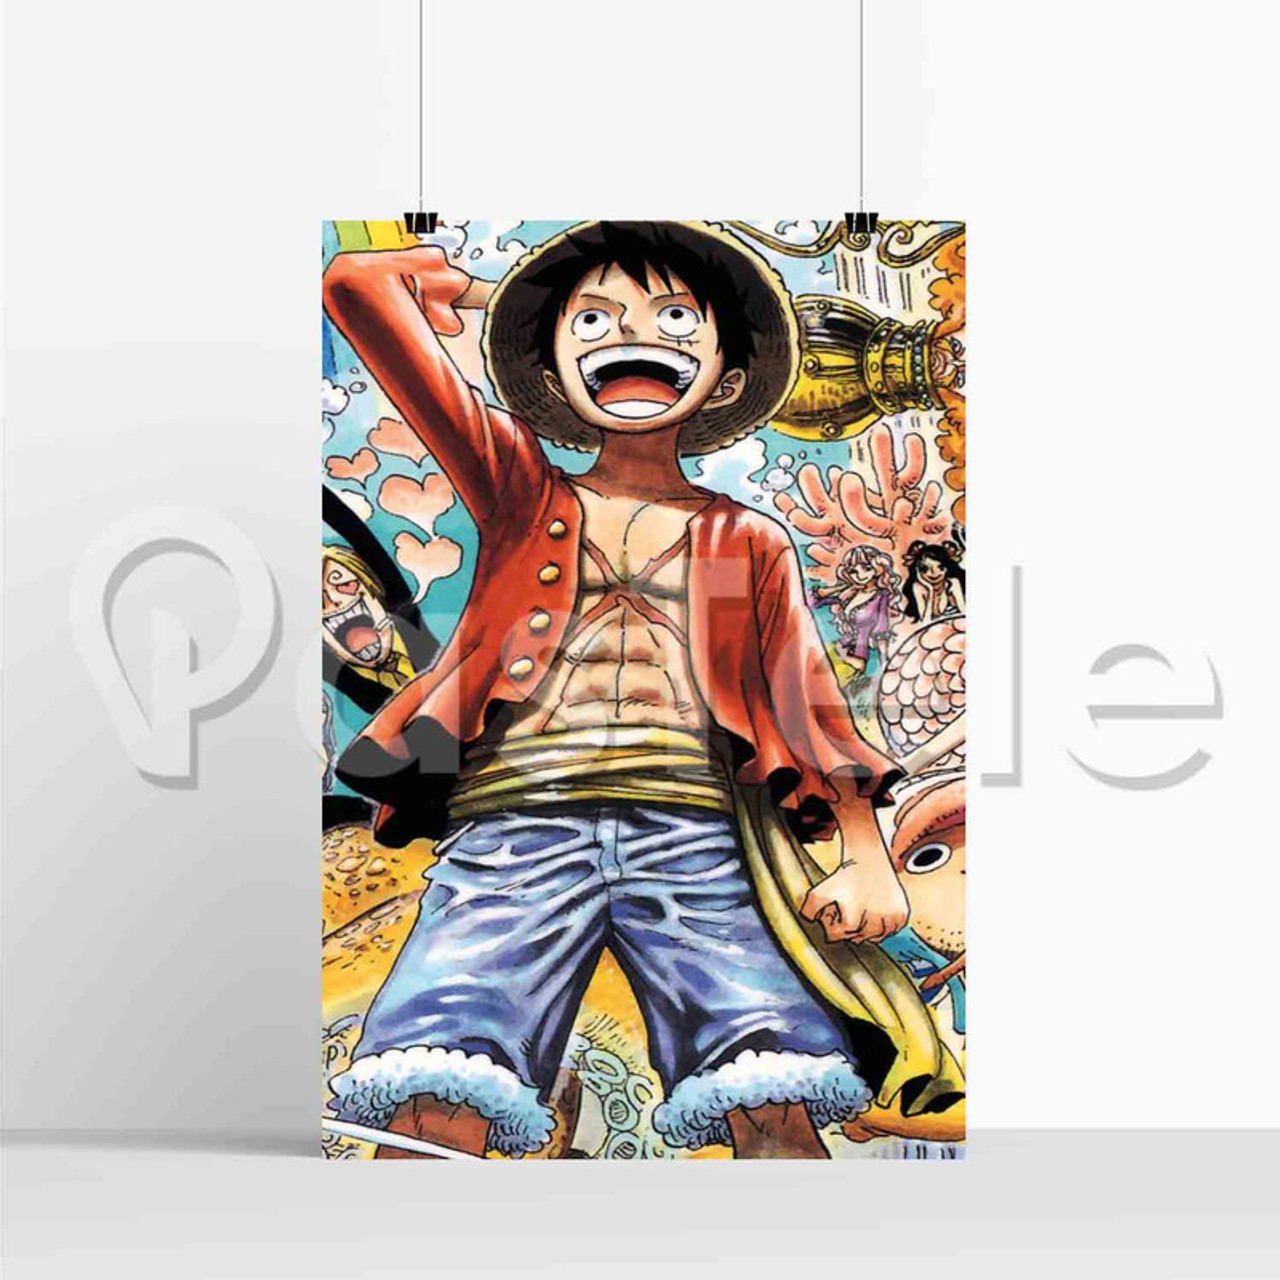 https://cdn11.bigcommerce.com/s-xhmrmcecz5/images/stencil/1280x1280/products/13439/14531/Monkey-D-Luffy-One-Piece-Silk-Poster-Print-Wall-Decor-20-x-13-Inch-24-x-36-Inch__01172.1604302592.jpg?c=1